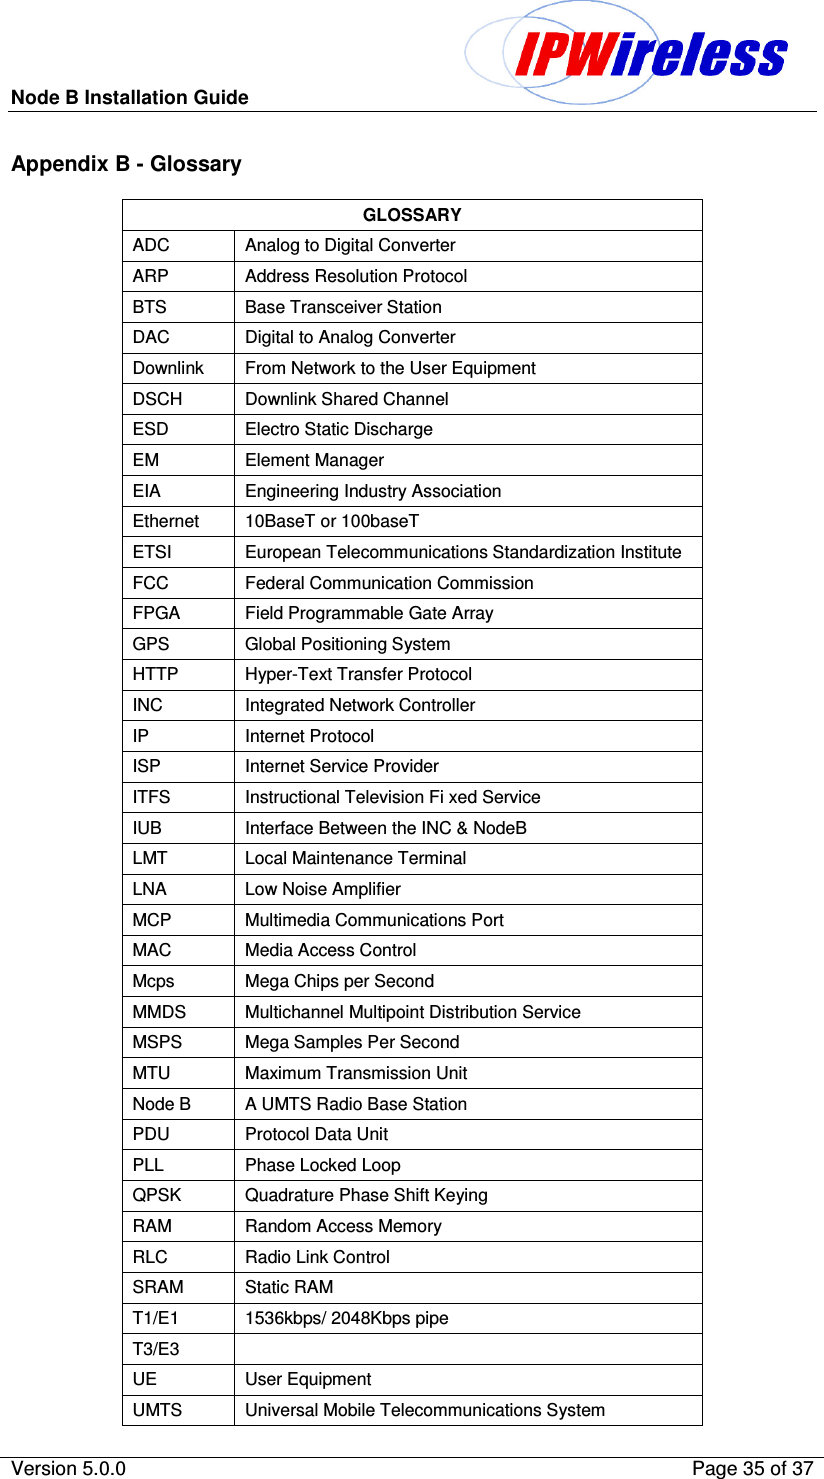 Node B Installation Guide                                              Version 5.0.0    Page 35 of 37  Appendix B - Glossary GLOSSARY ADC   Analog to Digital Converter ARP   Address Resolution Protocol BTS   Base Transceiver Station DAC   Digital to Analog Converter Downlink   From Network to the User Equipment DSCH   Downlink Shared Channel ESD   Electro Static Discharge EM   Element Manager EIA   Engineering Industry Association Ethernet  10BaseT or 100baseT ETSI   European Telecommunications Standardization Institute FCC   Federal Communication Commission FPGA   Field Programmable Gate Array GPS   Global Positioning System HTTP    Hyper-Text Transfer Protocol INC   Integrated Network Controller IP   Internet Protocol ISP   Internet Service Provider ITFS   Instructional Television Fi xed Service IUB   Interface Between the INC &amp; NodeB LMT   Local Maintenance Terminal LNA   Low Noise Amplifier MCP   Multimedia Communications Port MAC   Media Access Control Mcps   Mega Chips per Second MMDS   Multichannel Multipoint Distribution Service MSPS   Mega Samples Per Second MTU   Maximum Transmission Unit Node B   A UMTS Radio Base Station PDU   Protocol Data Unit PLL   Phase Locked Loop QPSK   Quadrature Phase Shift Keying RAM   Random Access Memory RLC   Radio Link Control SRAM   Static RAM T1/E1   1536kbps/ 2048Kbps pipe T3/E3   UE   User Equipment UMTS   Universal Mobile Telecommunications System 